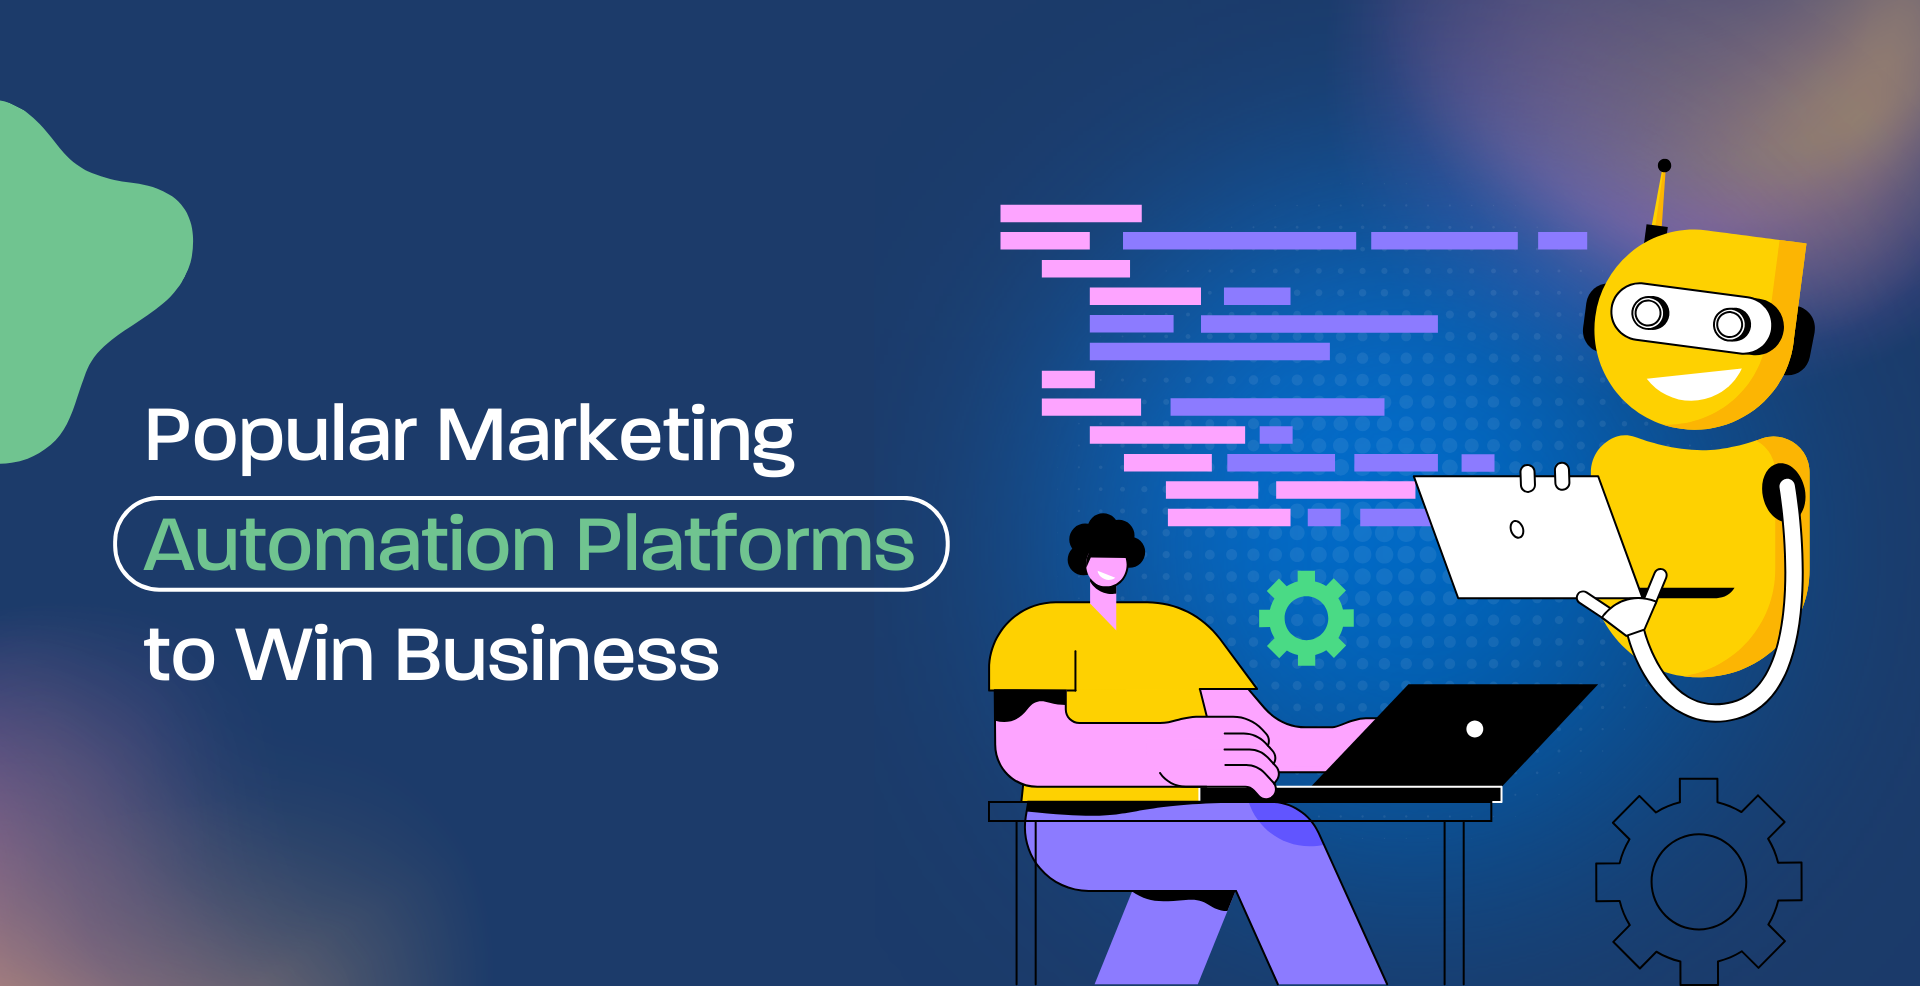 Popular marketing automation platforms to win business